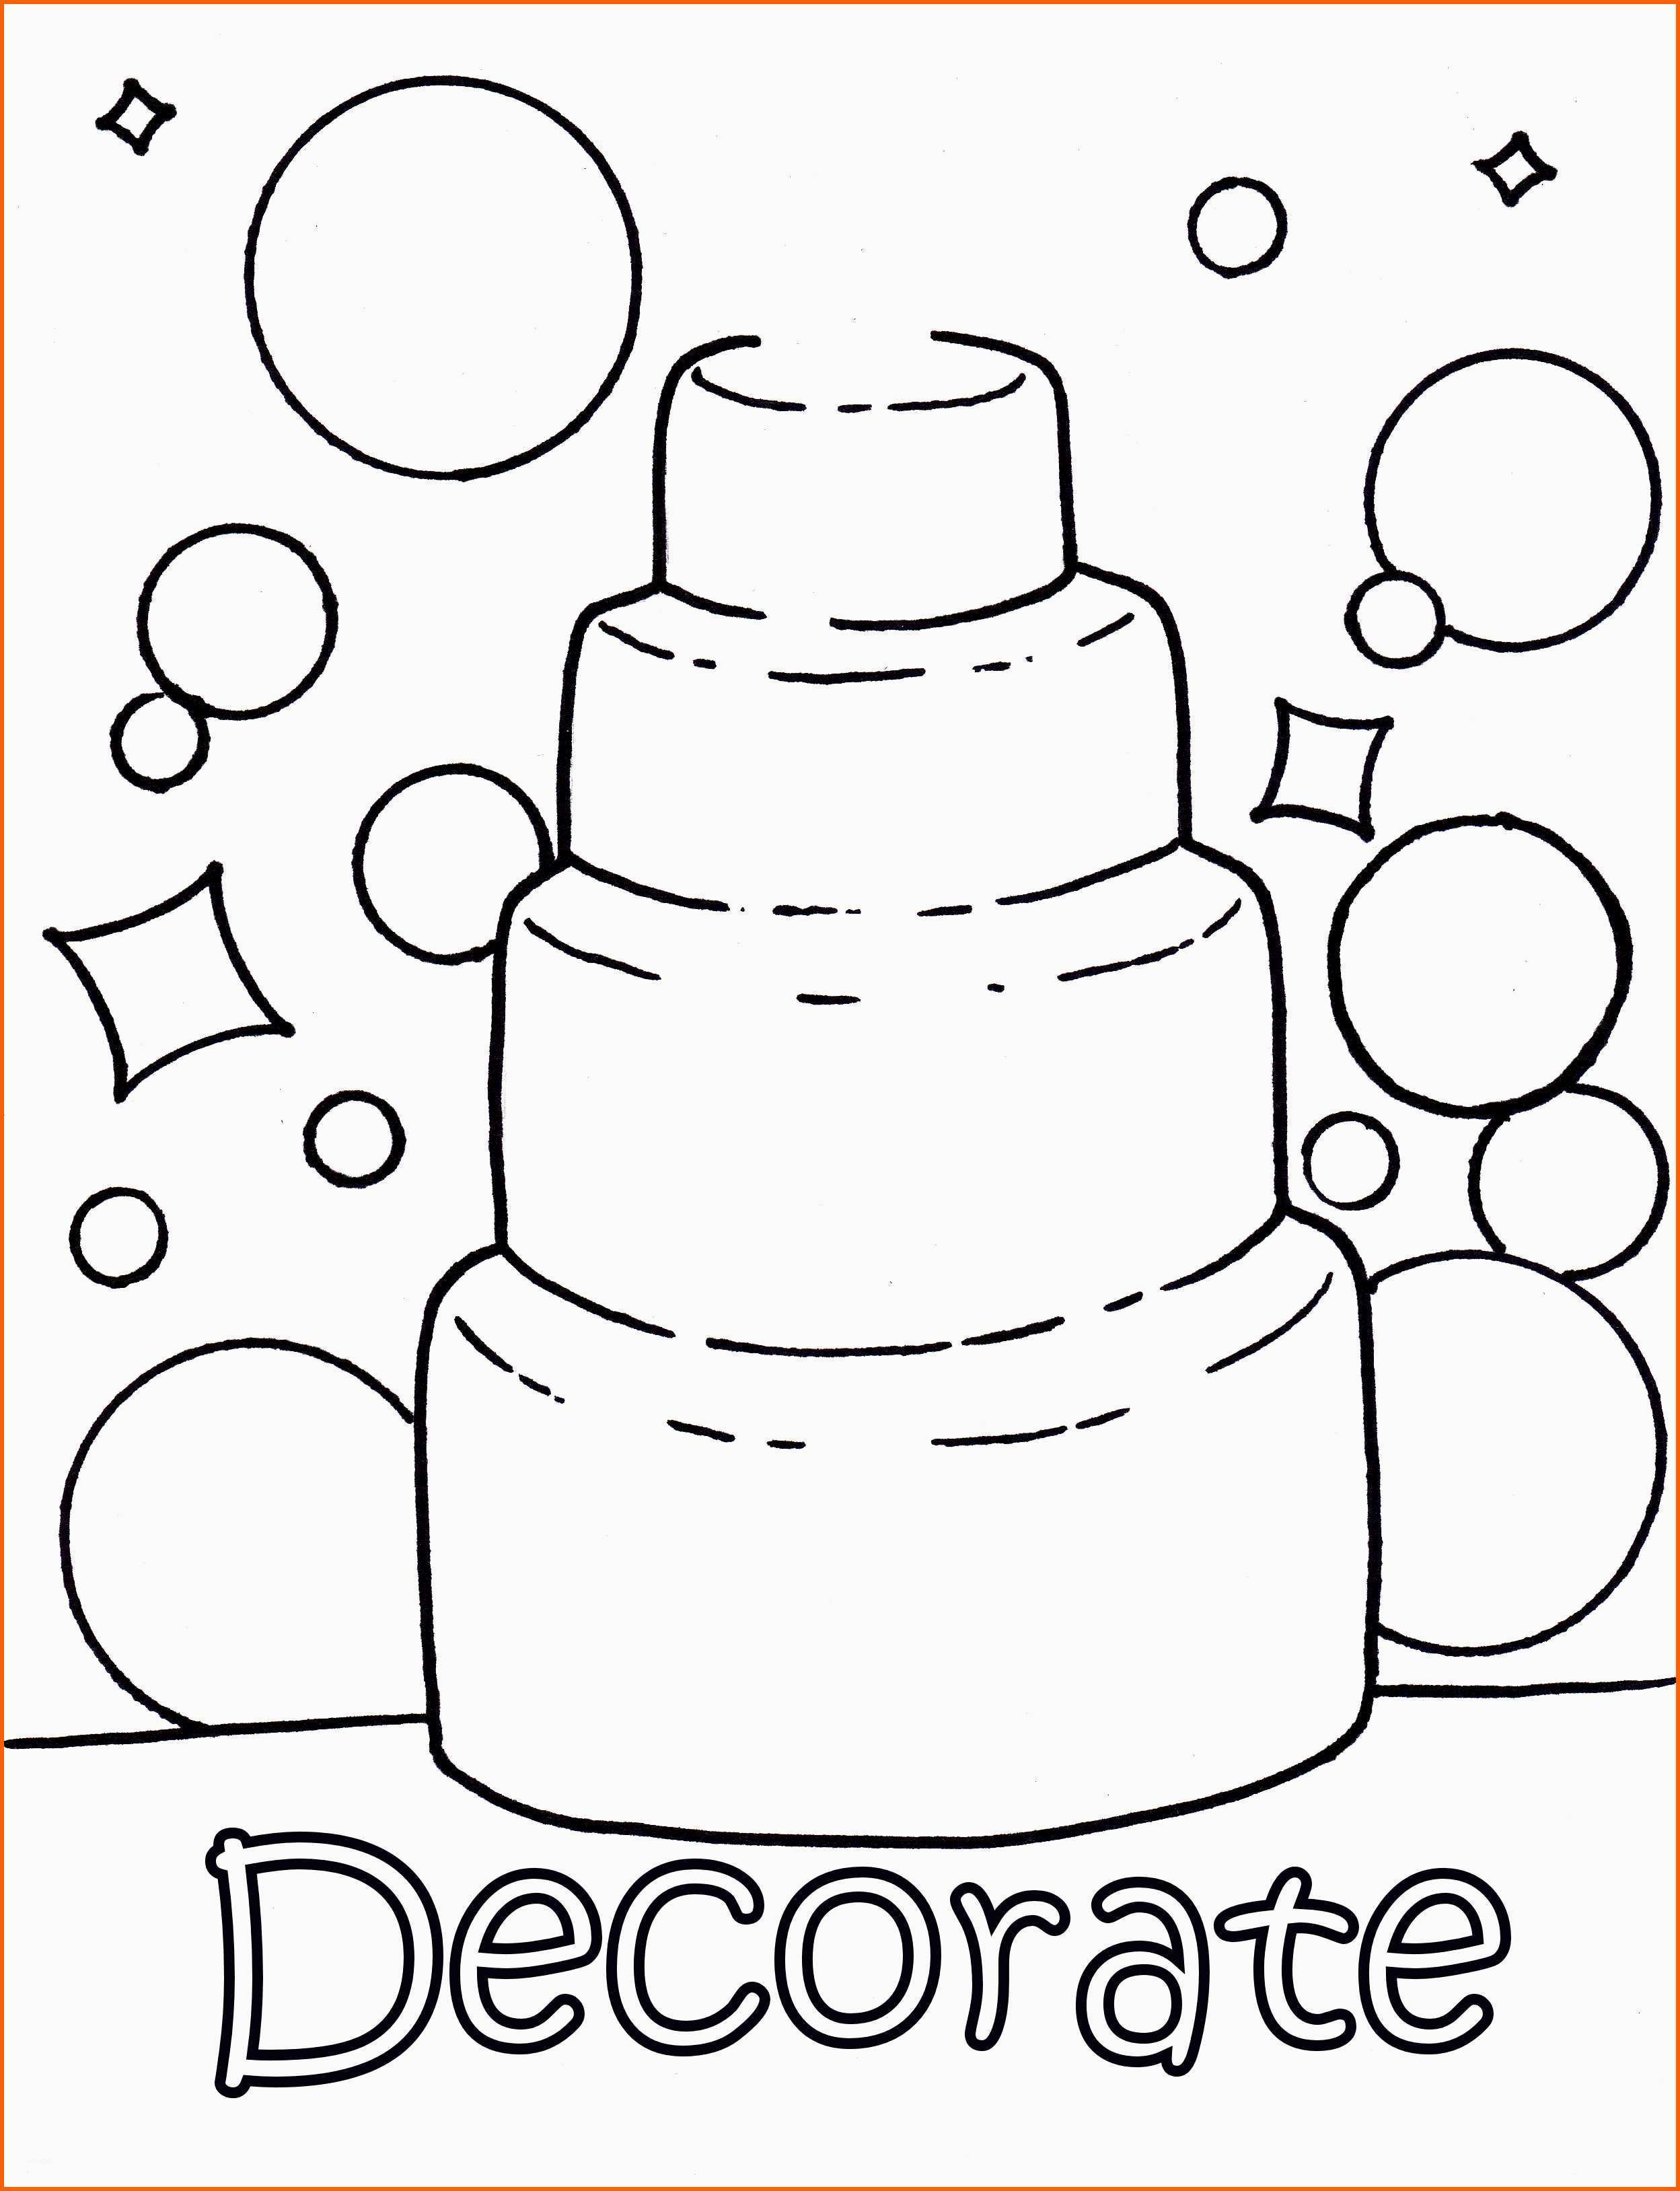 hervorragend-luxury-customized-wedding-coloring-pages-spurl